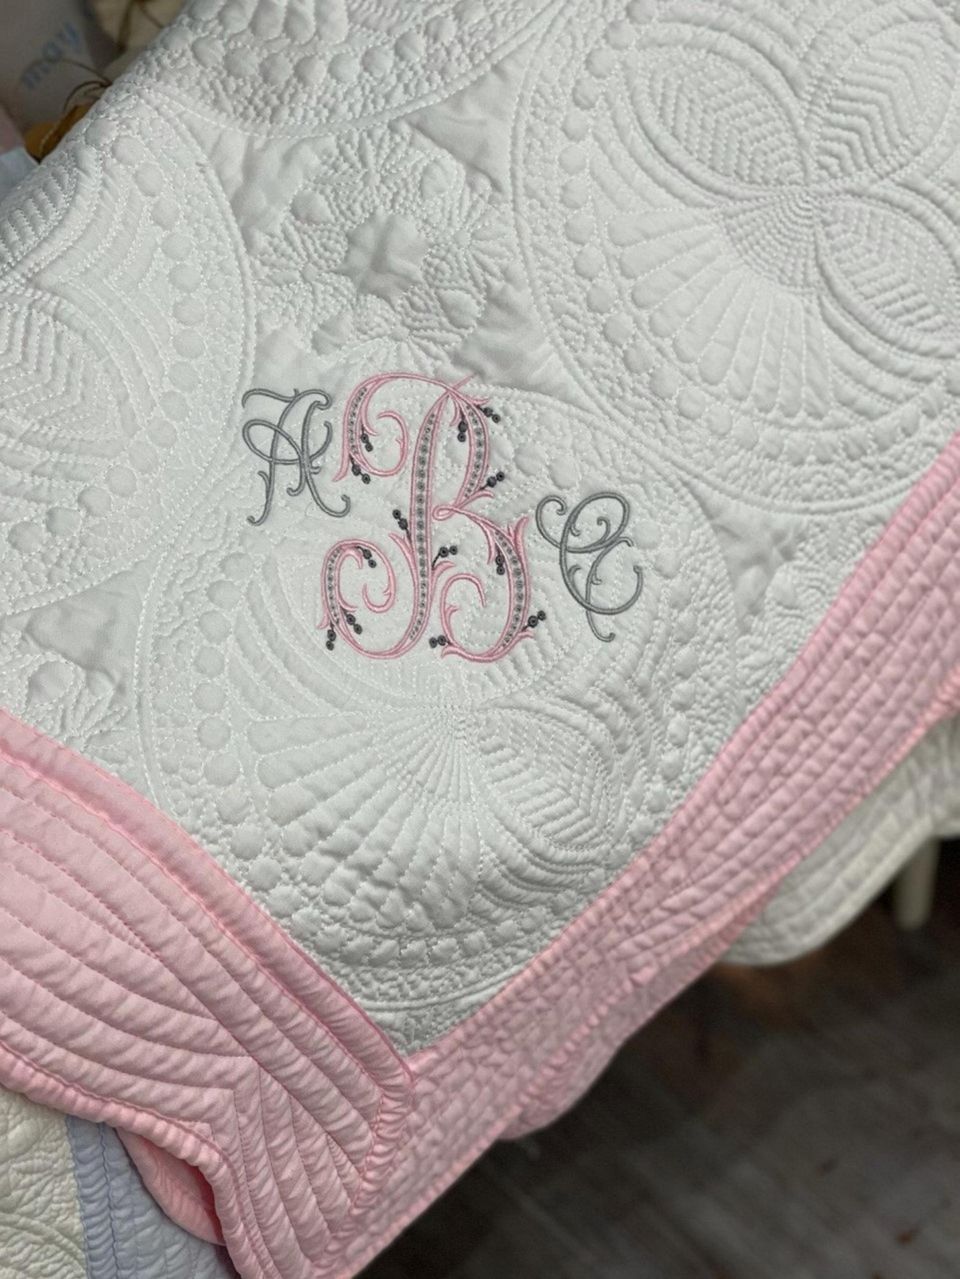 A made-to-order monogram quilt is a family keepsake